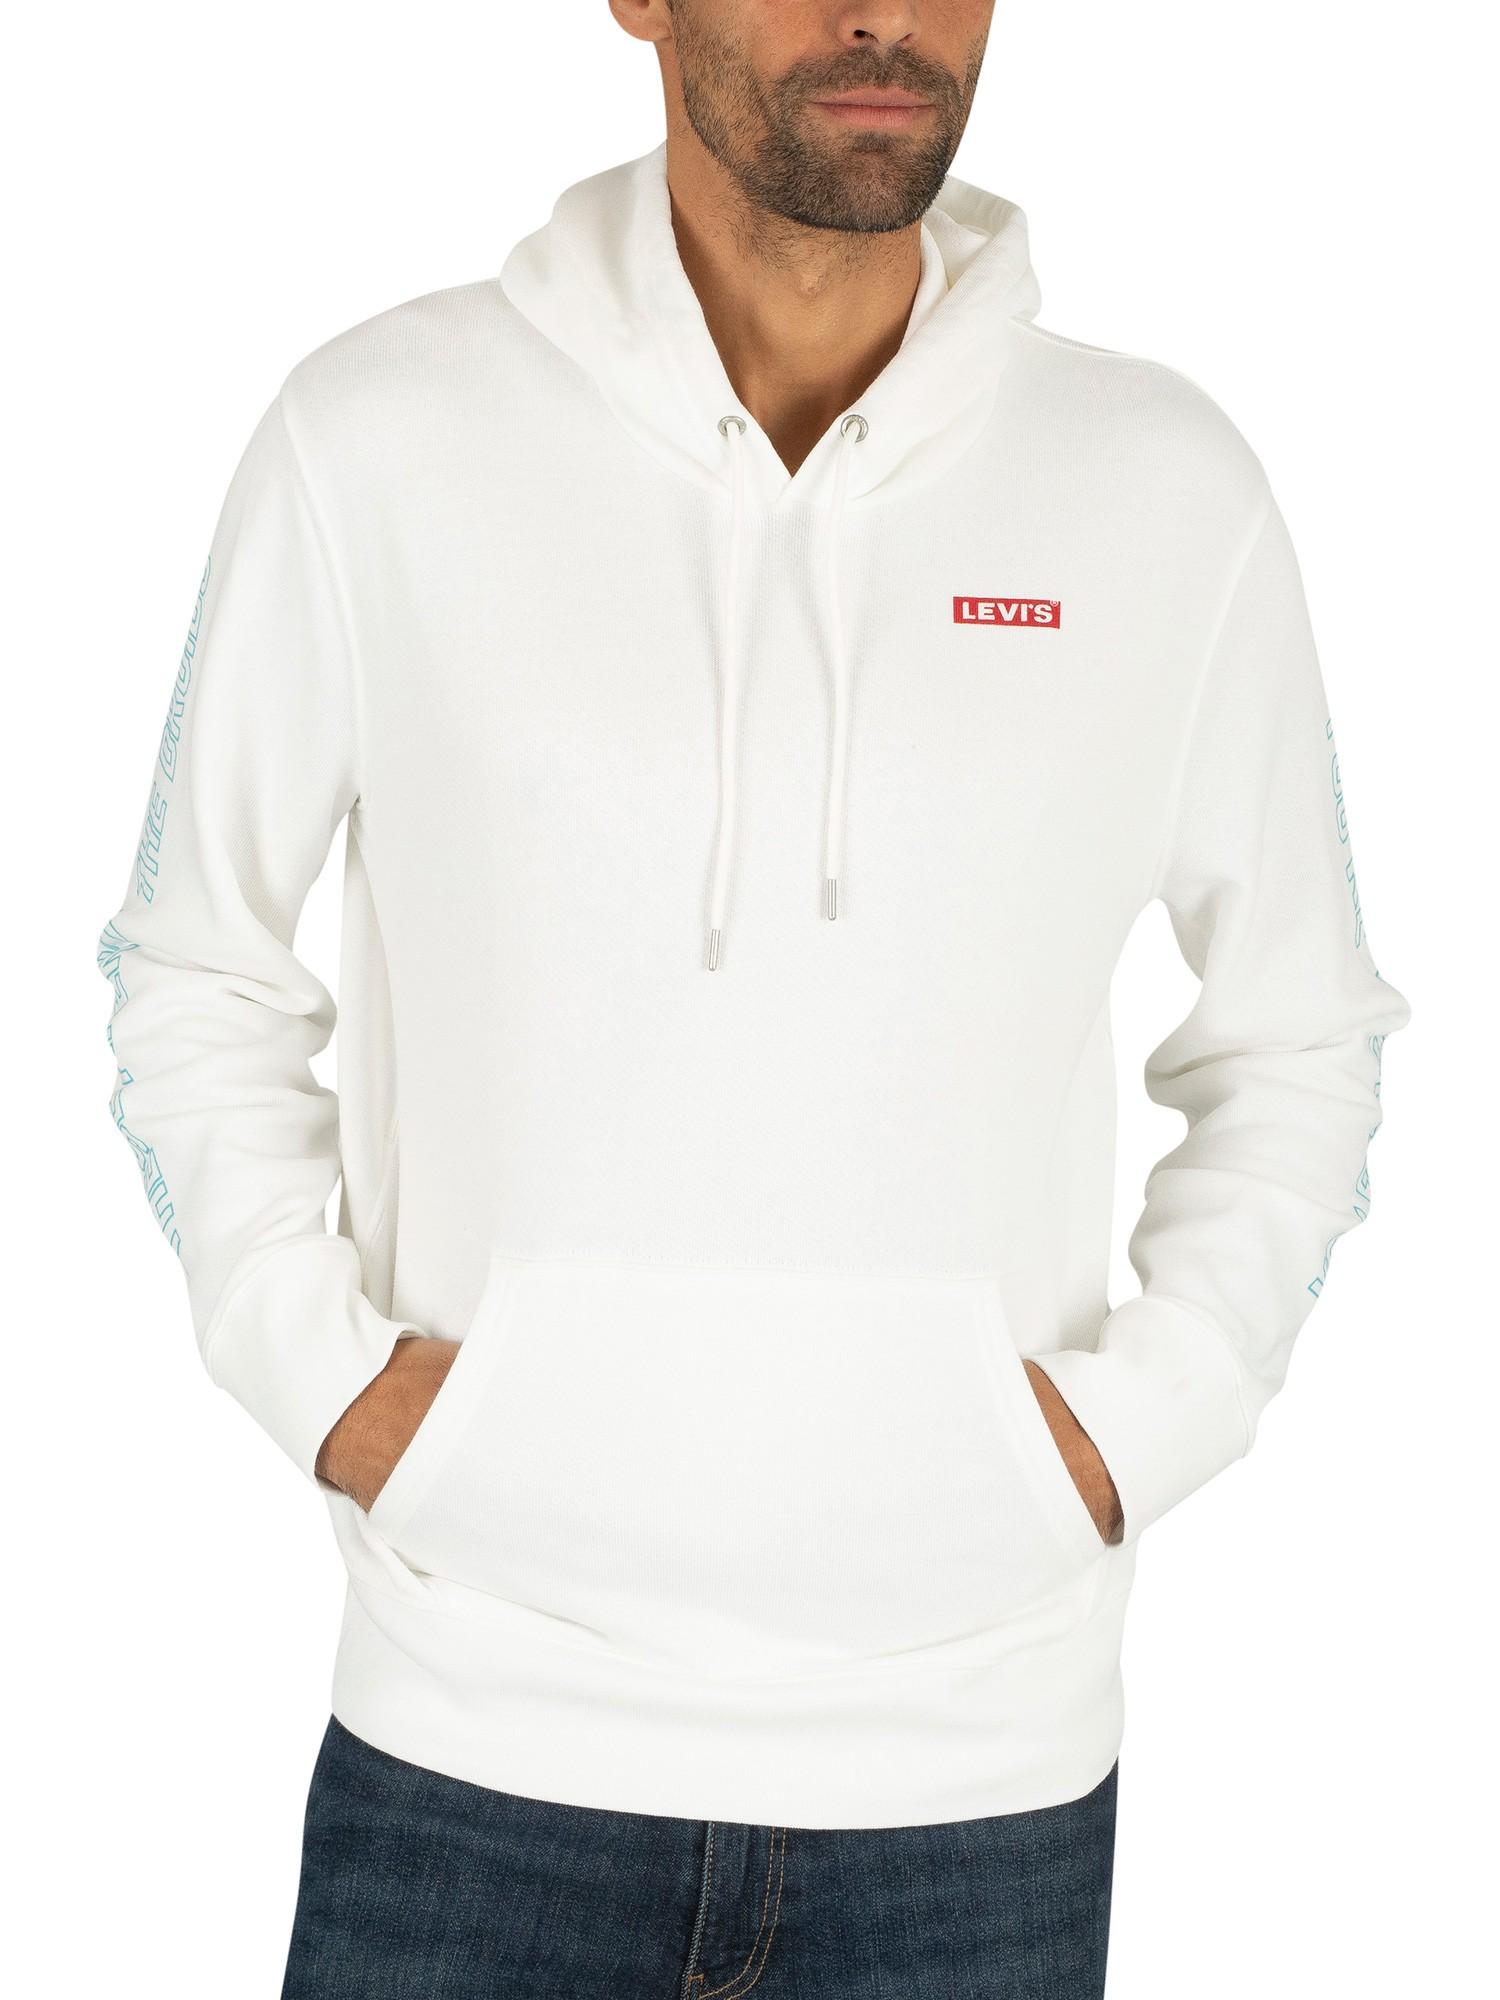 Levi's Star Wars Droids Pullover Hoodie in White for Men | Lyst